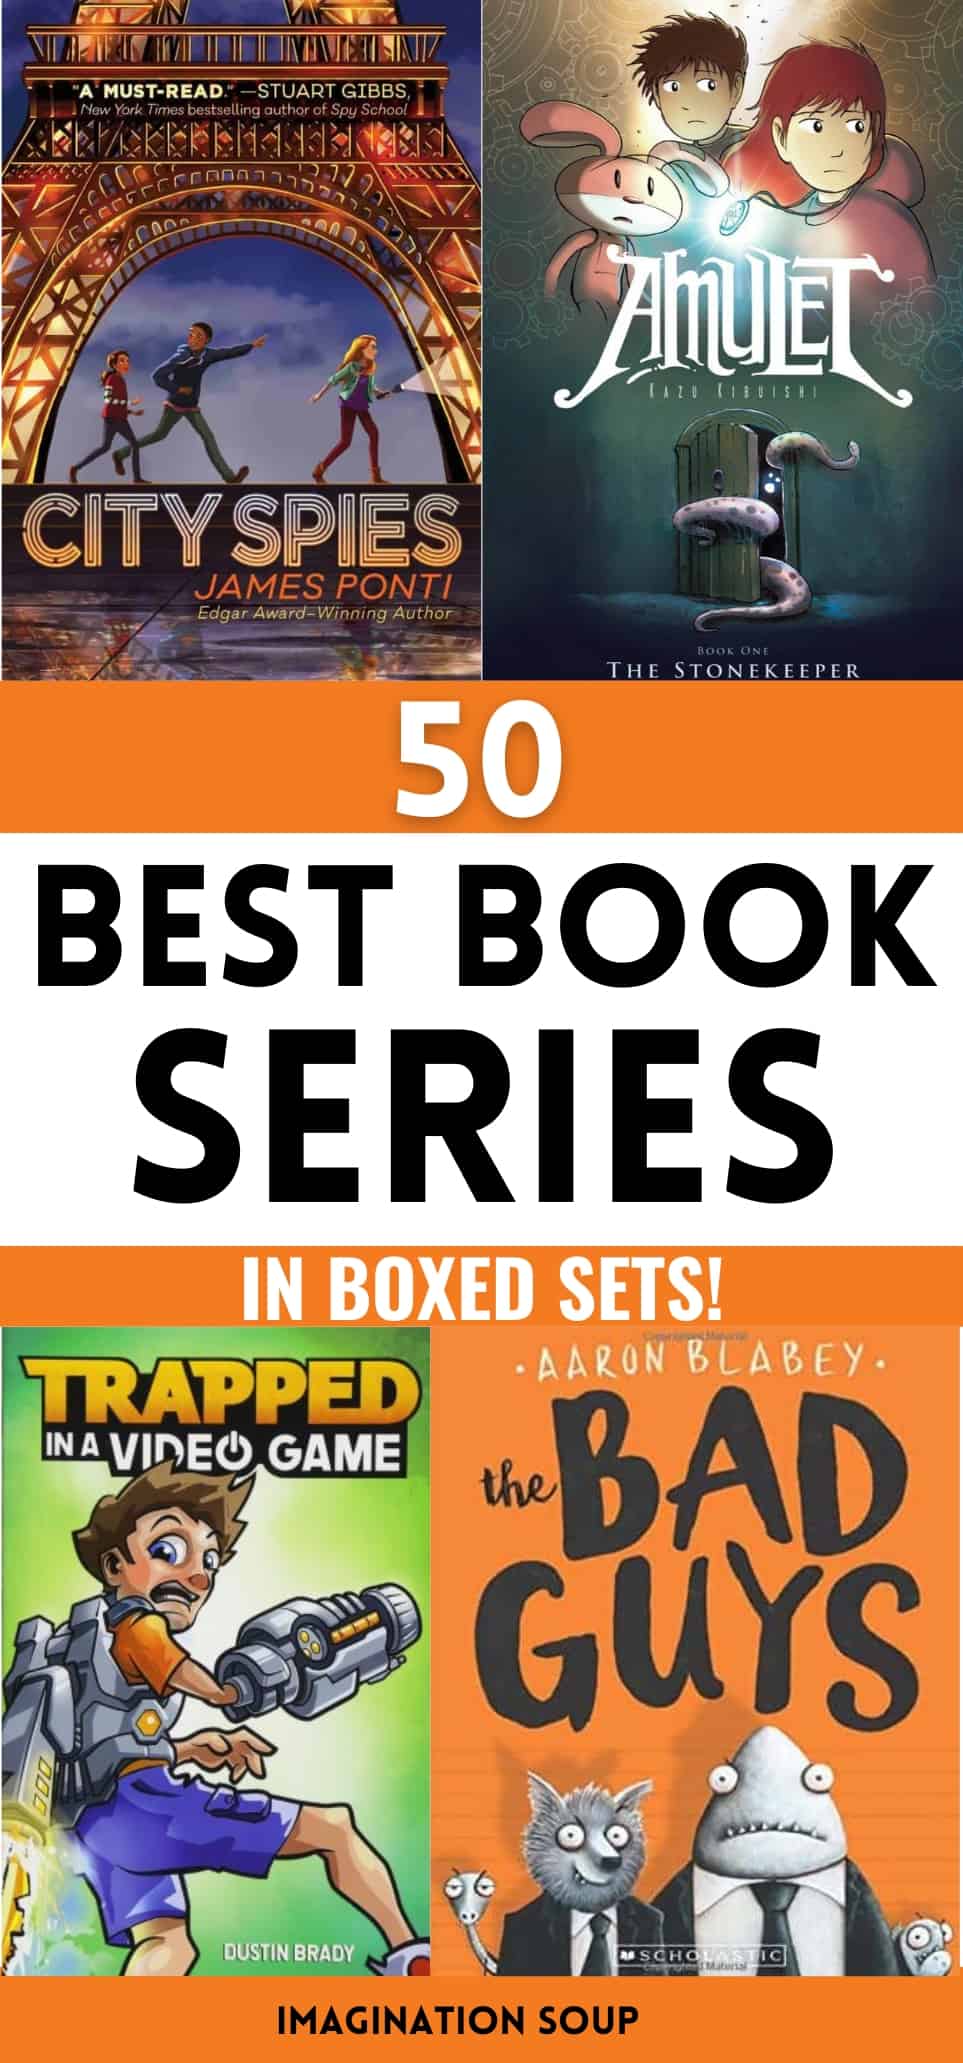 BEST BOX BOOK SERIES for kids